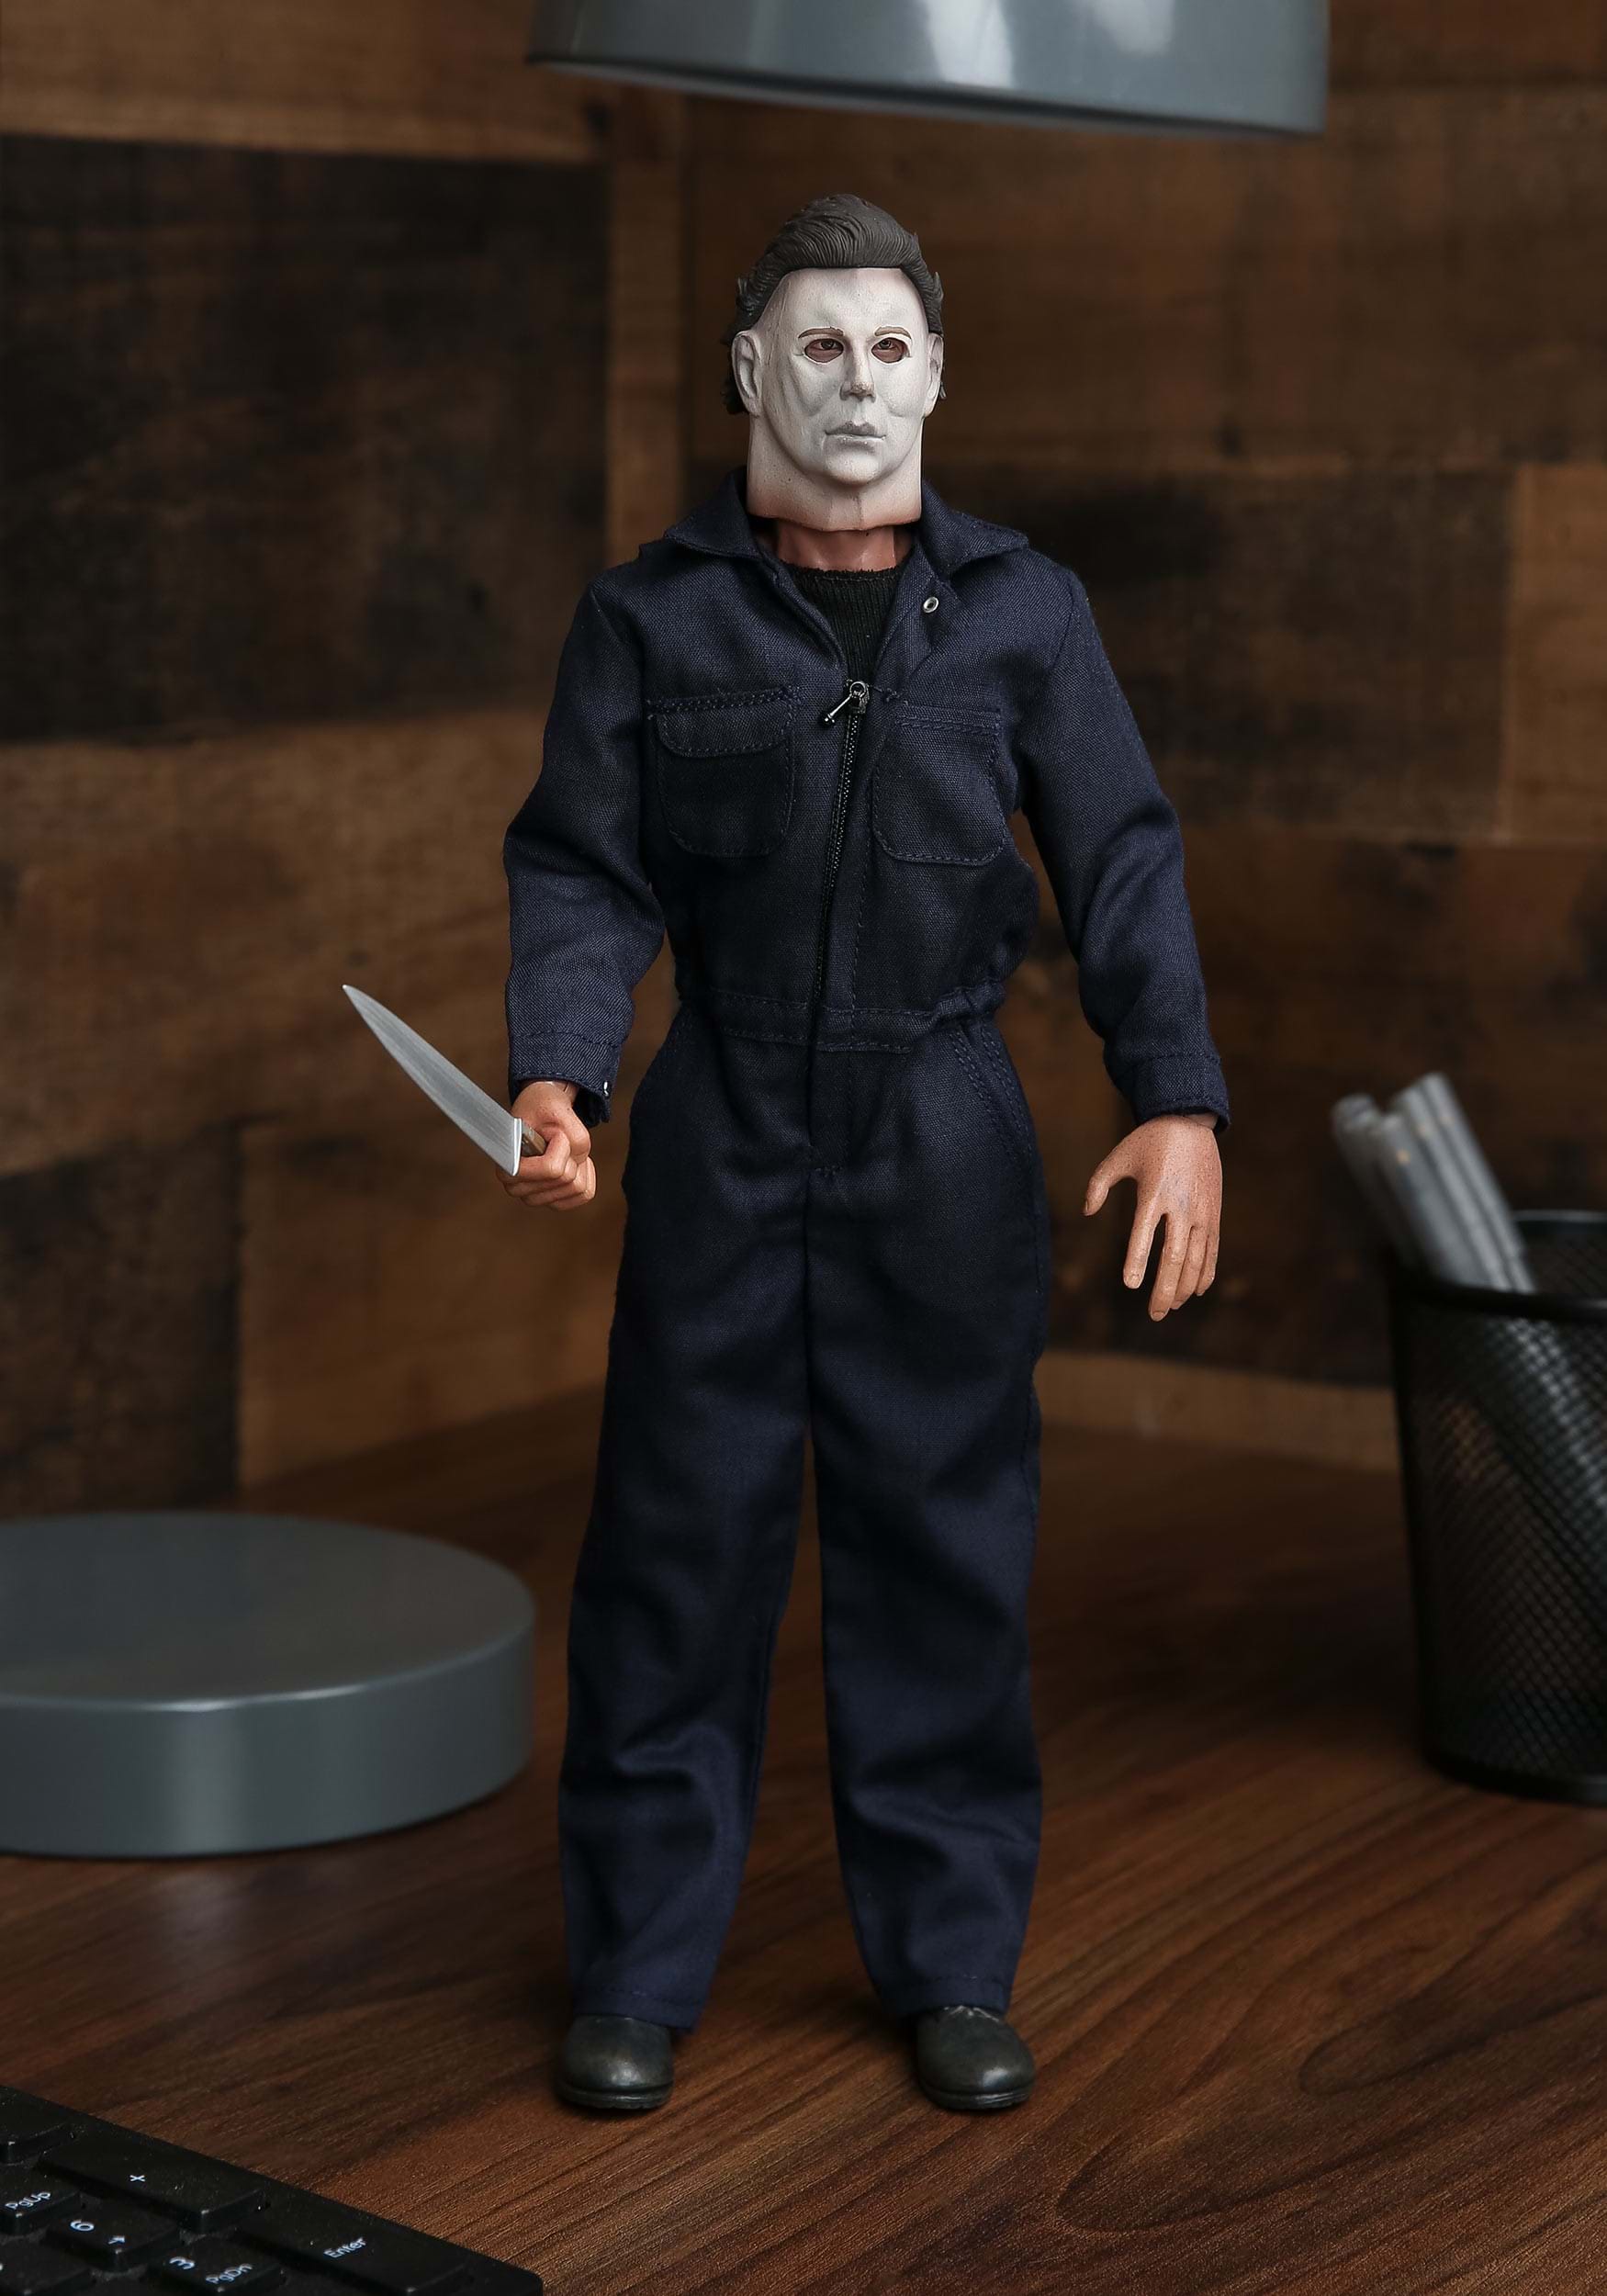 Halloween Movie - 1978 Michael Myers One:12 Collective The 6.5 Action  Figure by Mezco Toyz - A & D Products NY Corp. Cool Toy Den